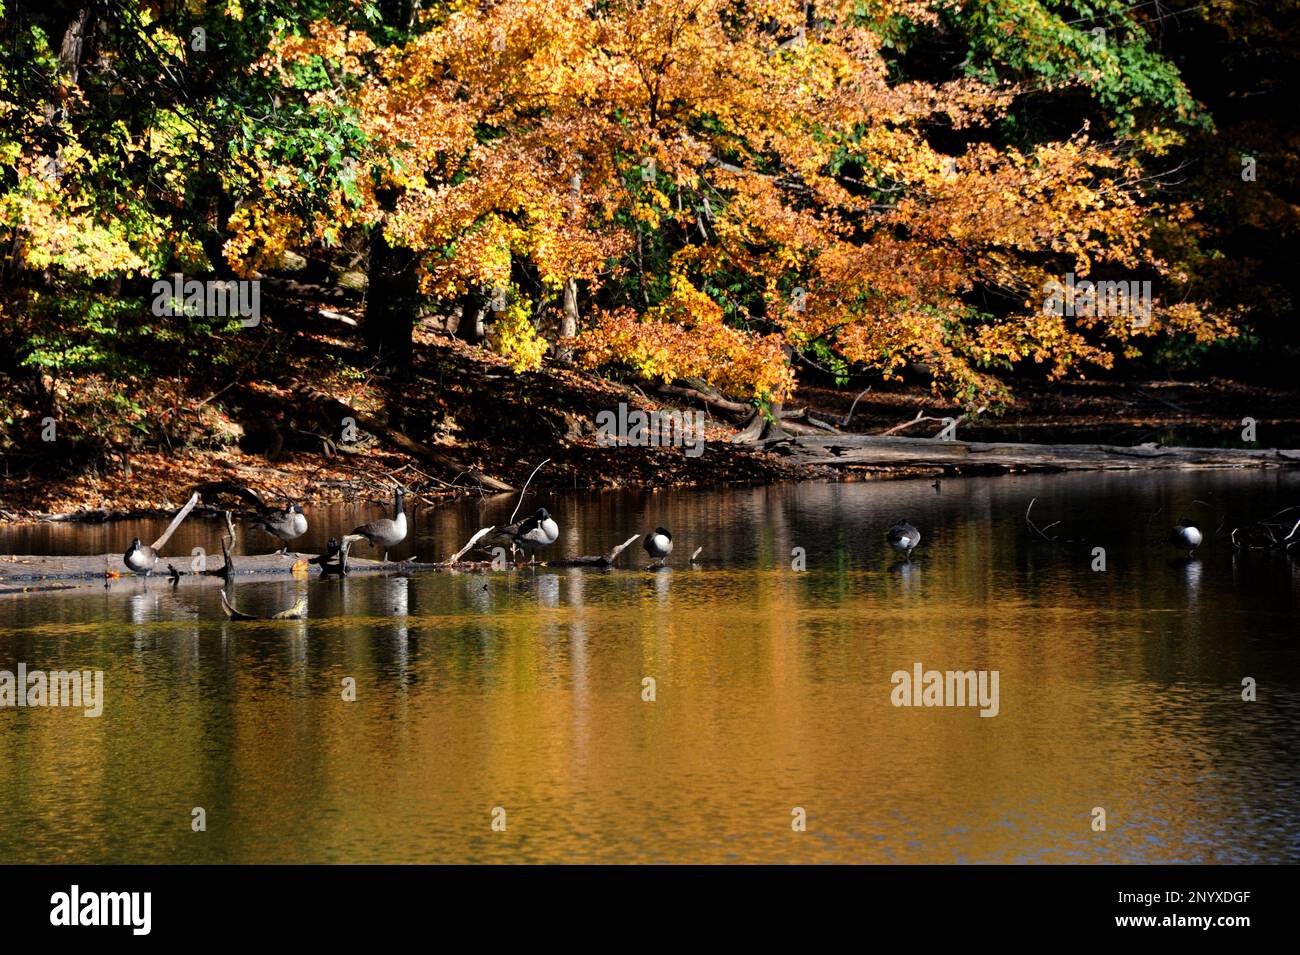 Log, on Poplar Tree Lake, serves as resting place for a flock of Canadian Geese in Meeman Shelby Forest State Park outside of Memphis, Tennessee.  Lak Stock Photo